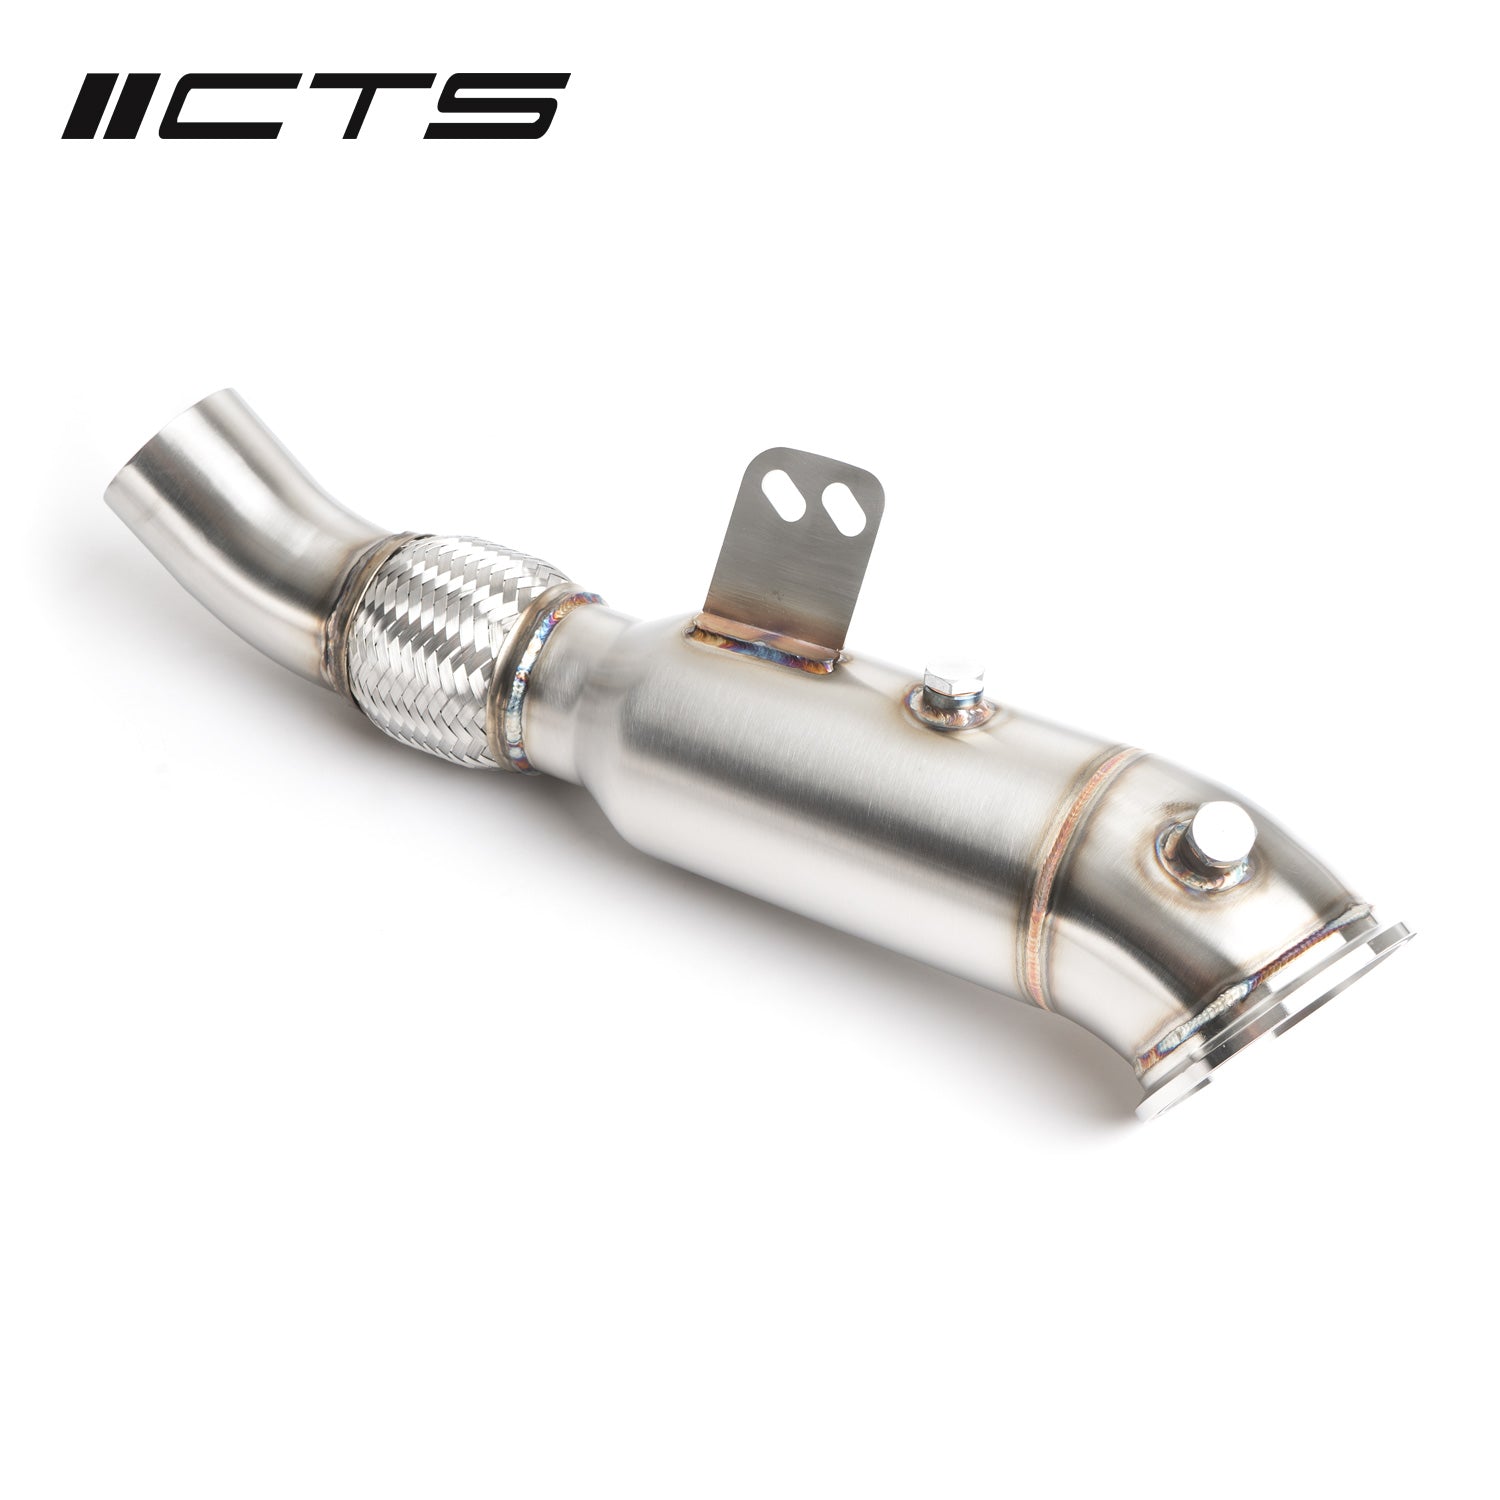 CTS TURBO 4.5″ CATLESS DOWNPIPE FOR MK5 A90 2020 TOYOTA SUPRA